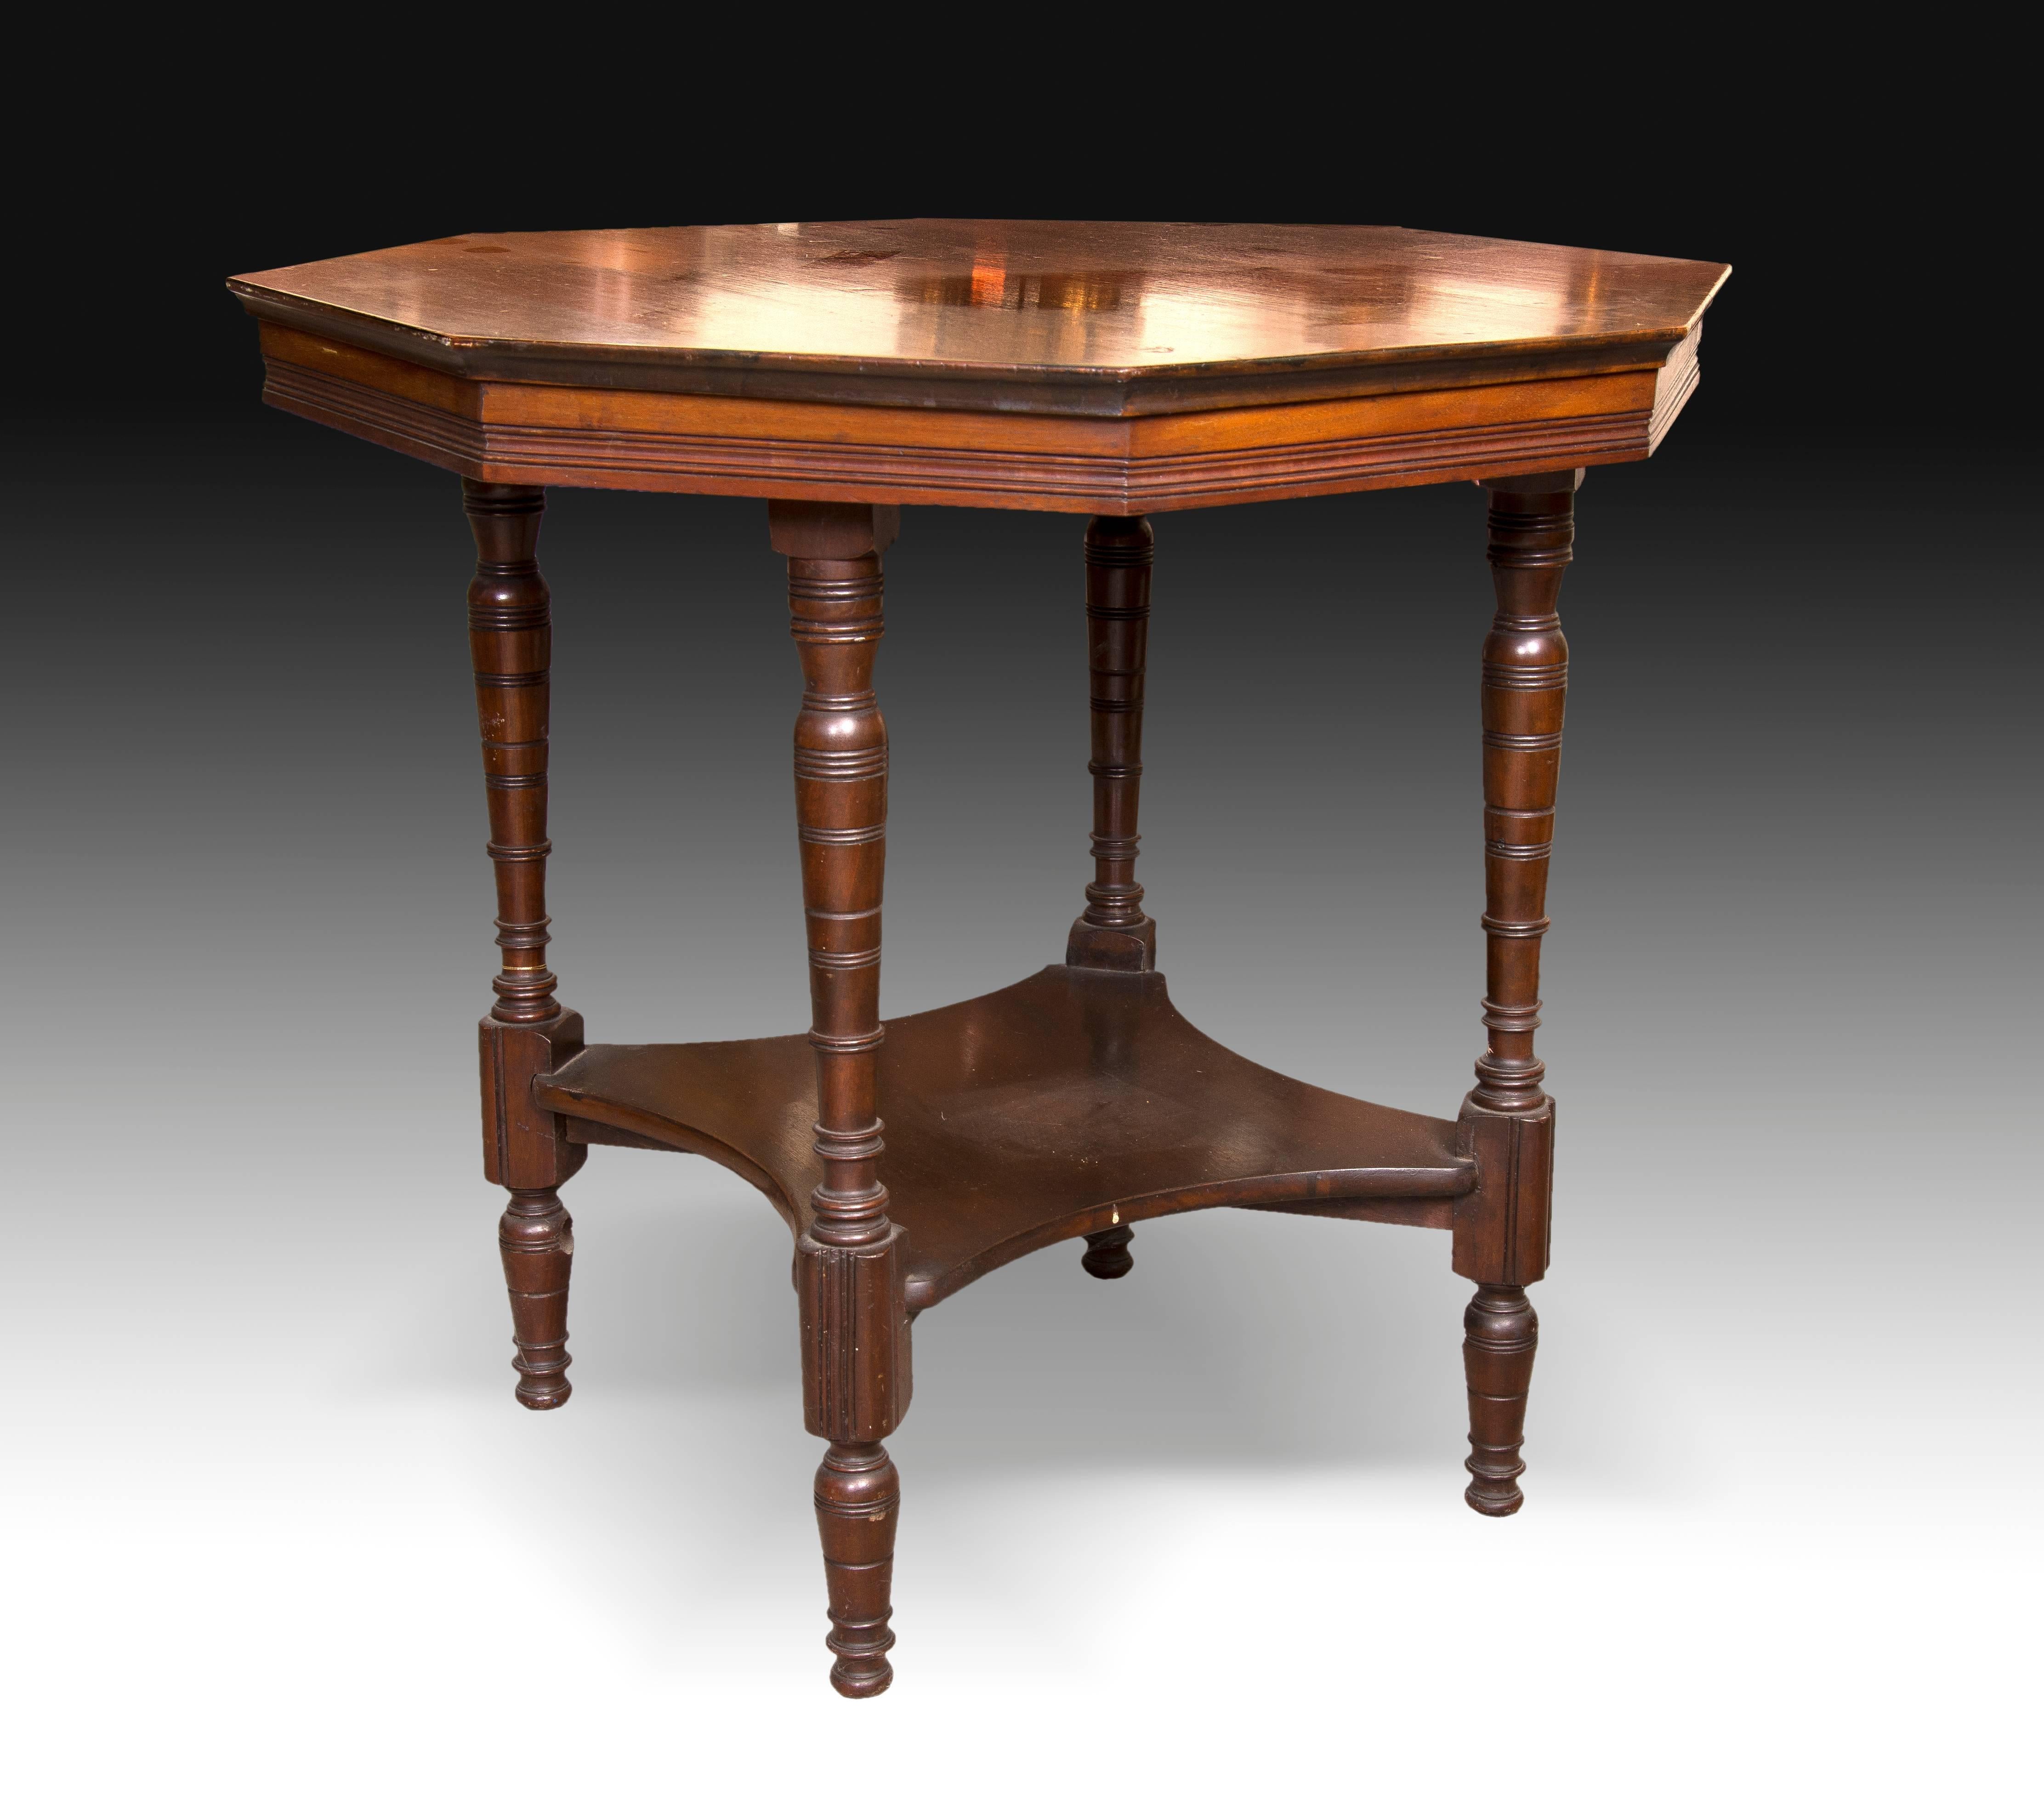 Side table with octagonal straight board, made of rosewood combined with another tone to enhance the first. The four legs, turned with lines, are joined with a flat rhomboidal chambrane. The decoration has been reduced to enhance the quality of the